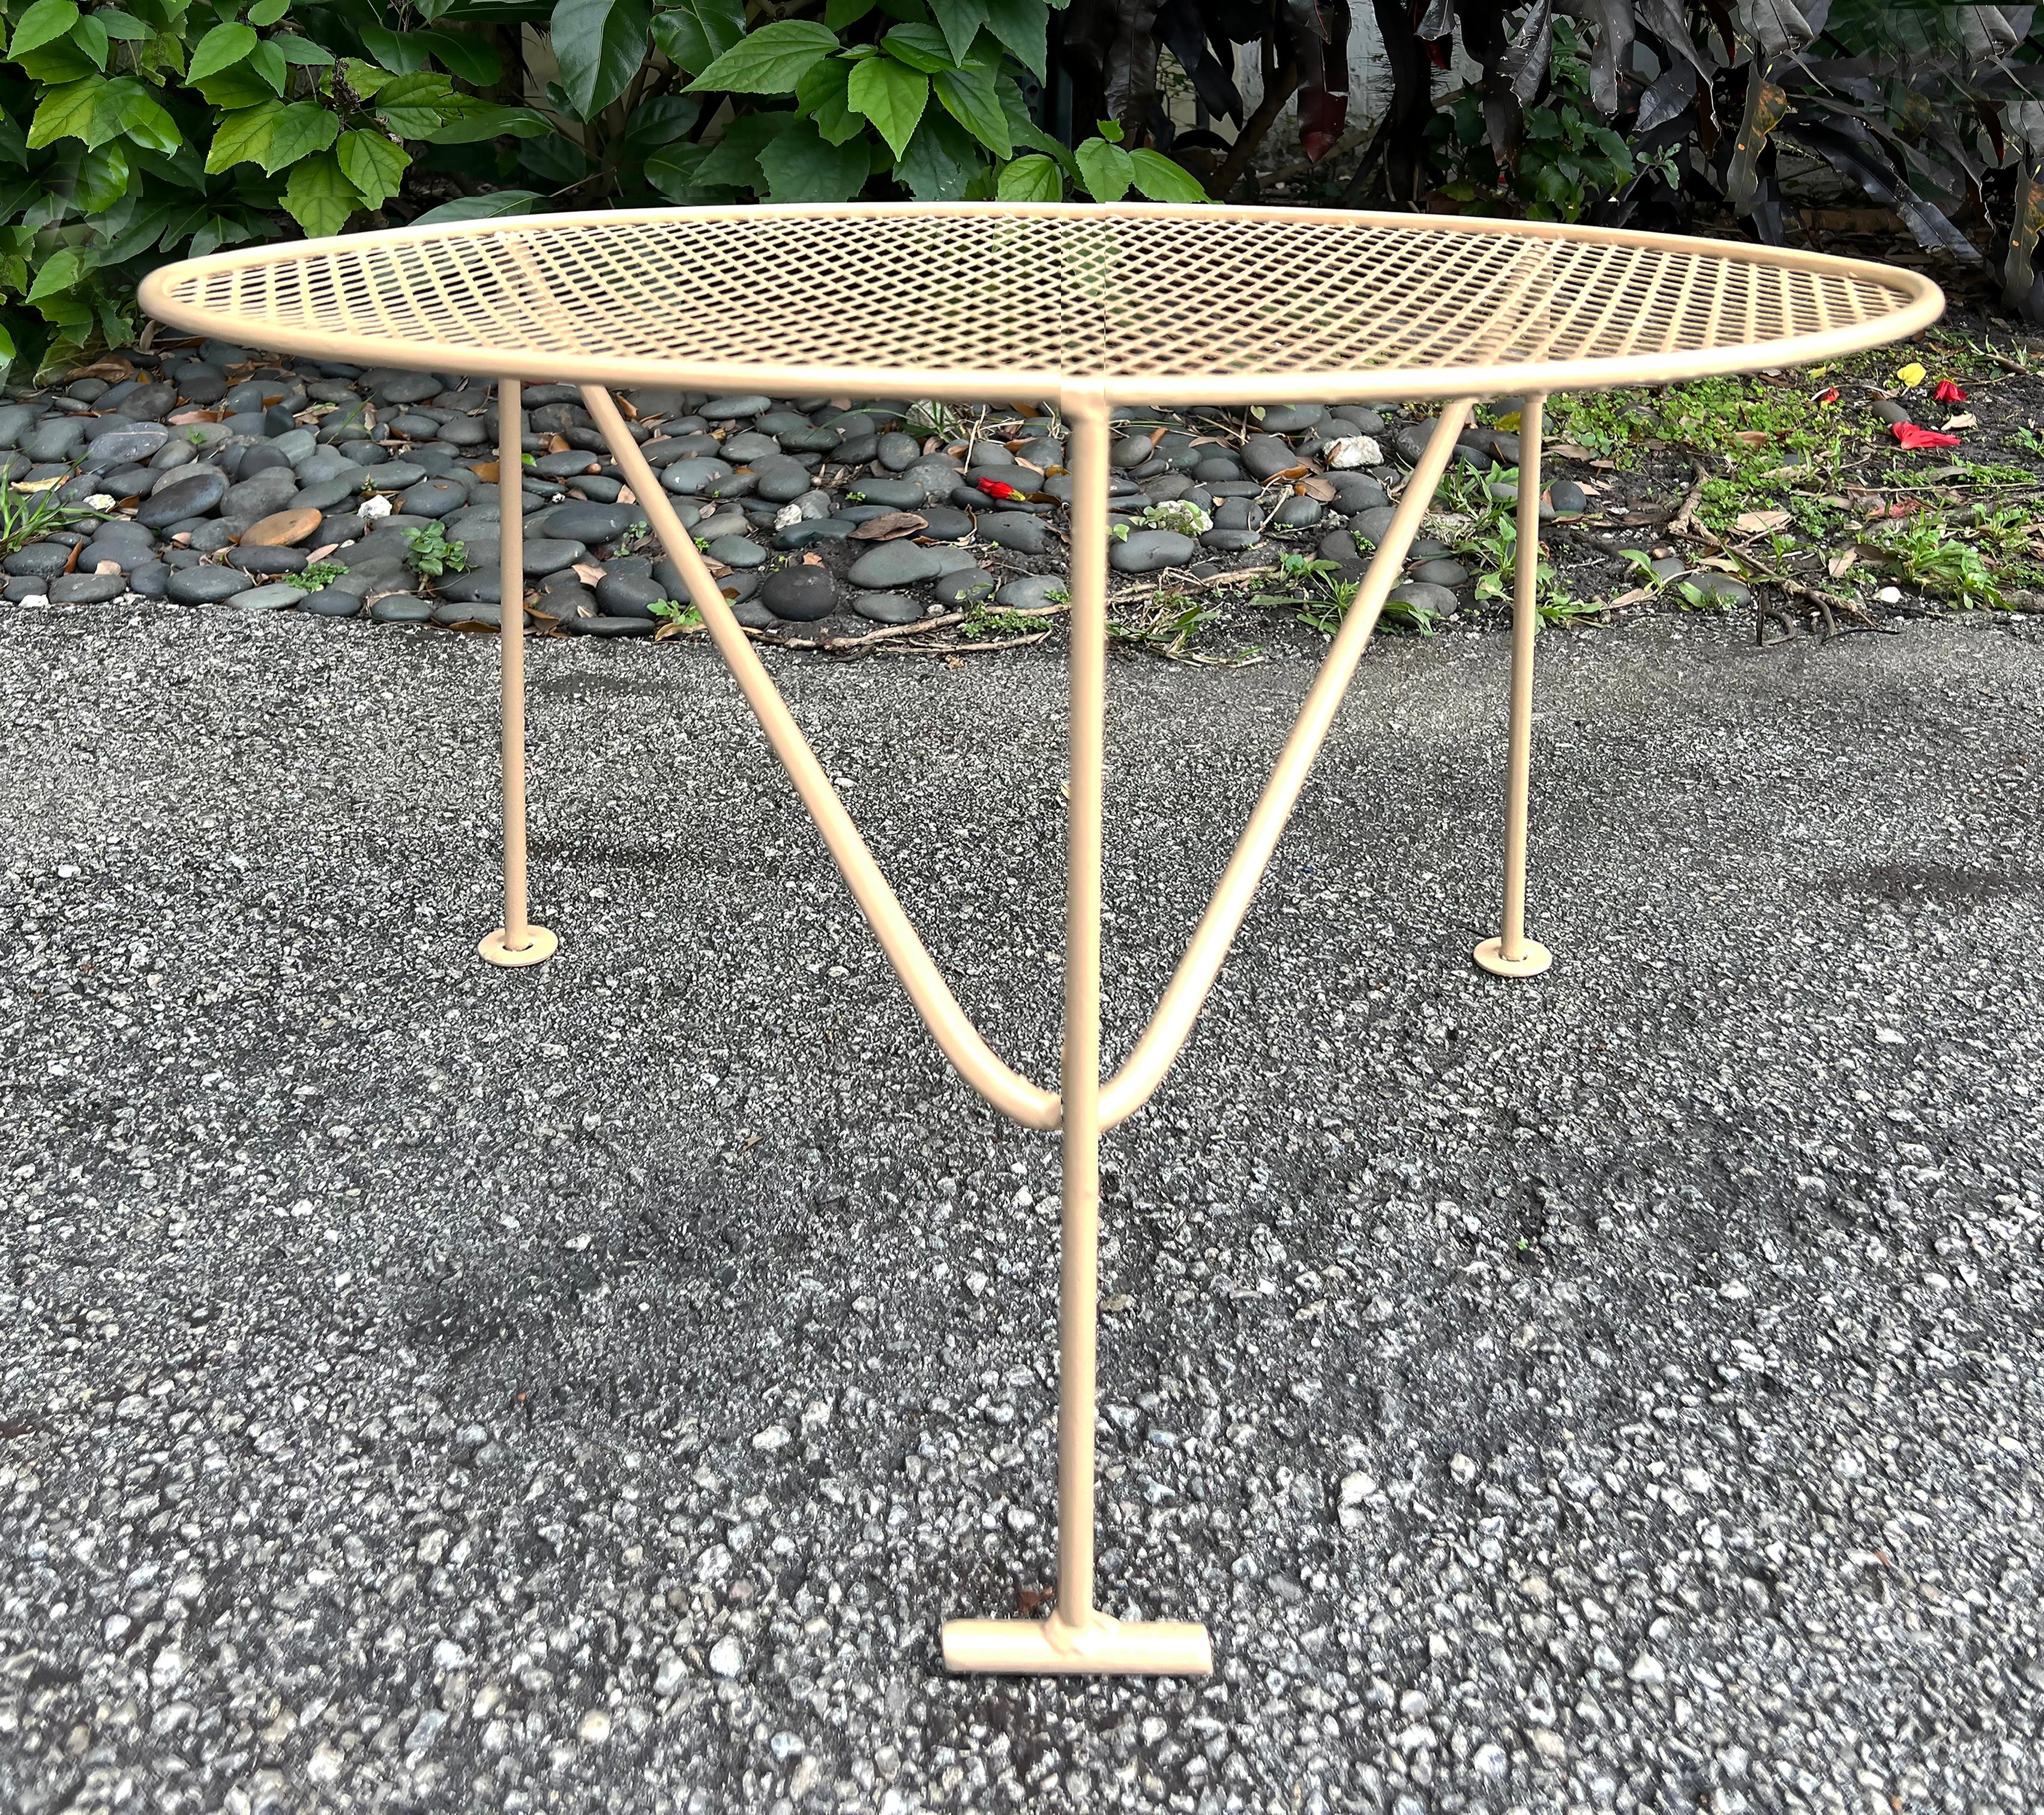 1950s Salterini Iron Tripod Outdoor Garden Side Table,  Vintage

Offered for sale is a 1950s Salterini tripod outdoor side table that has been painted a 